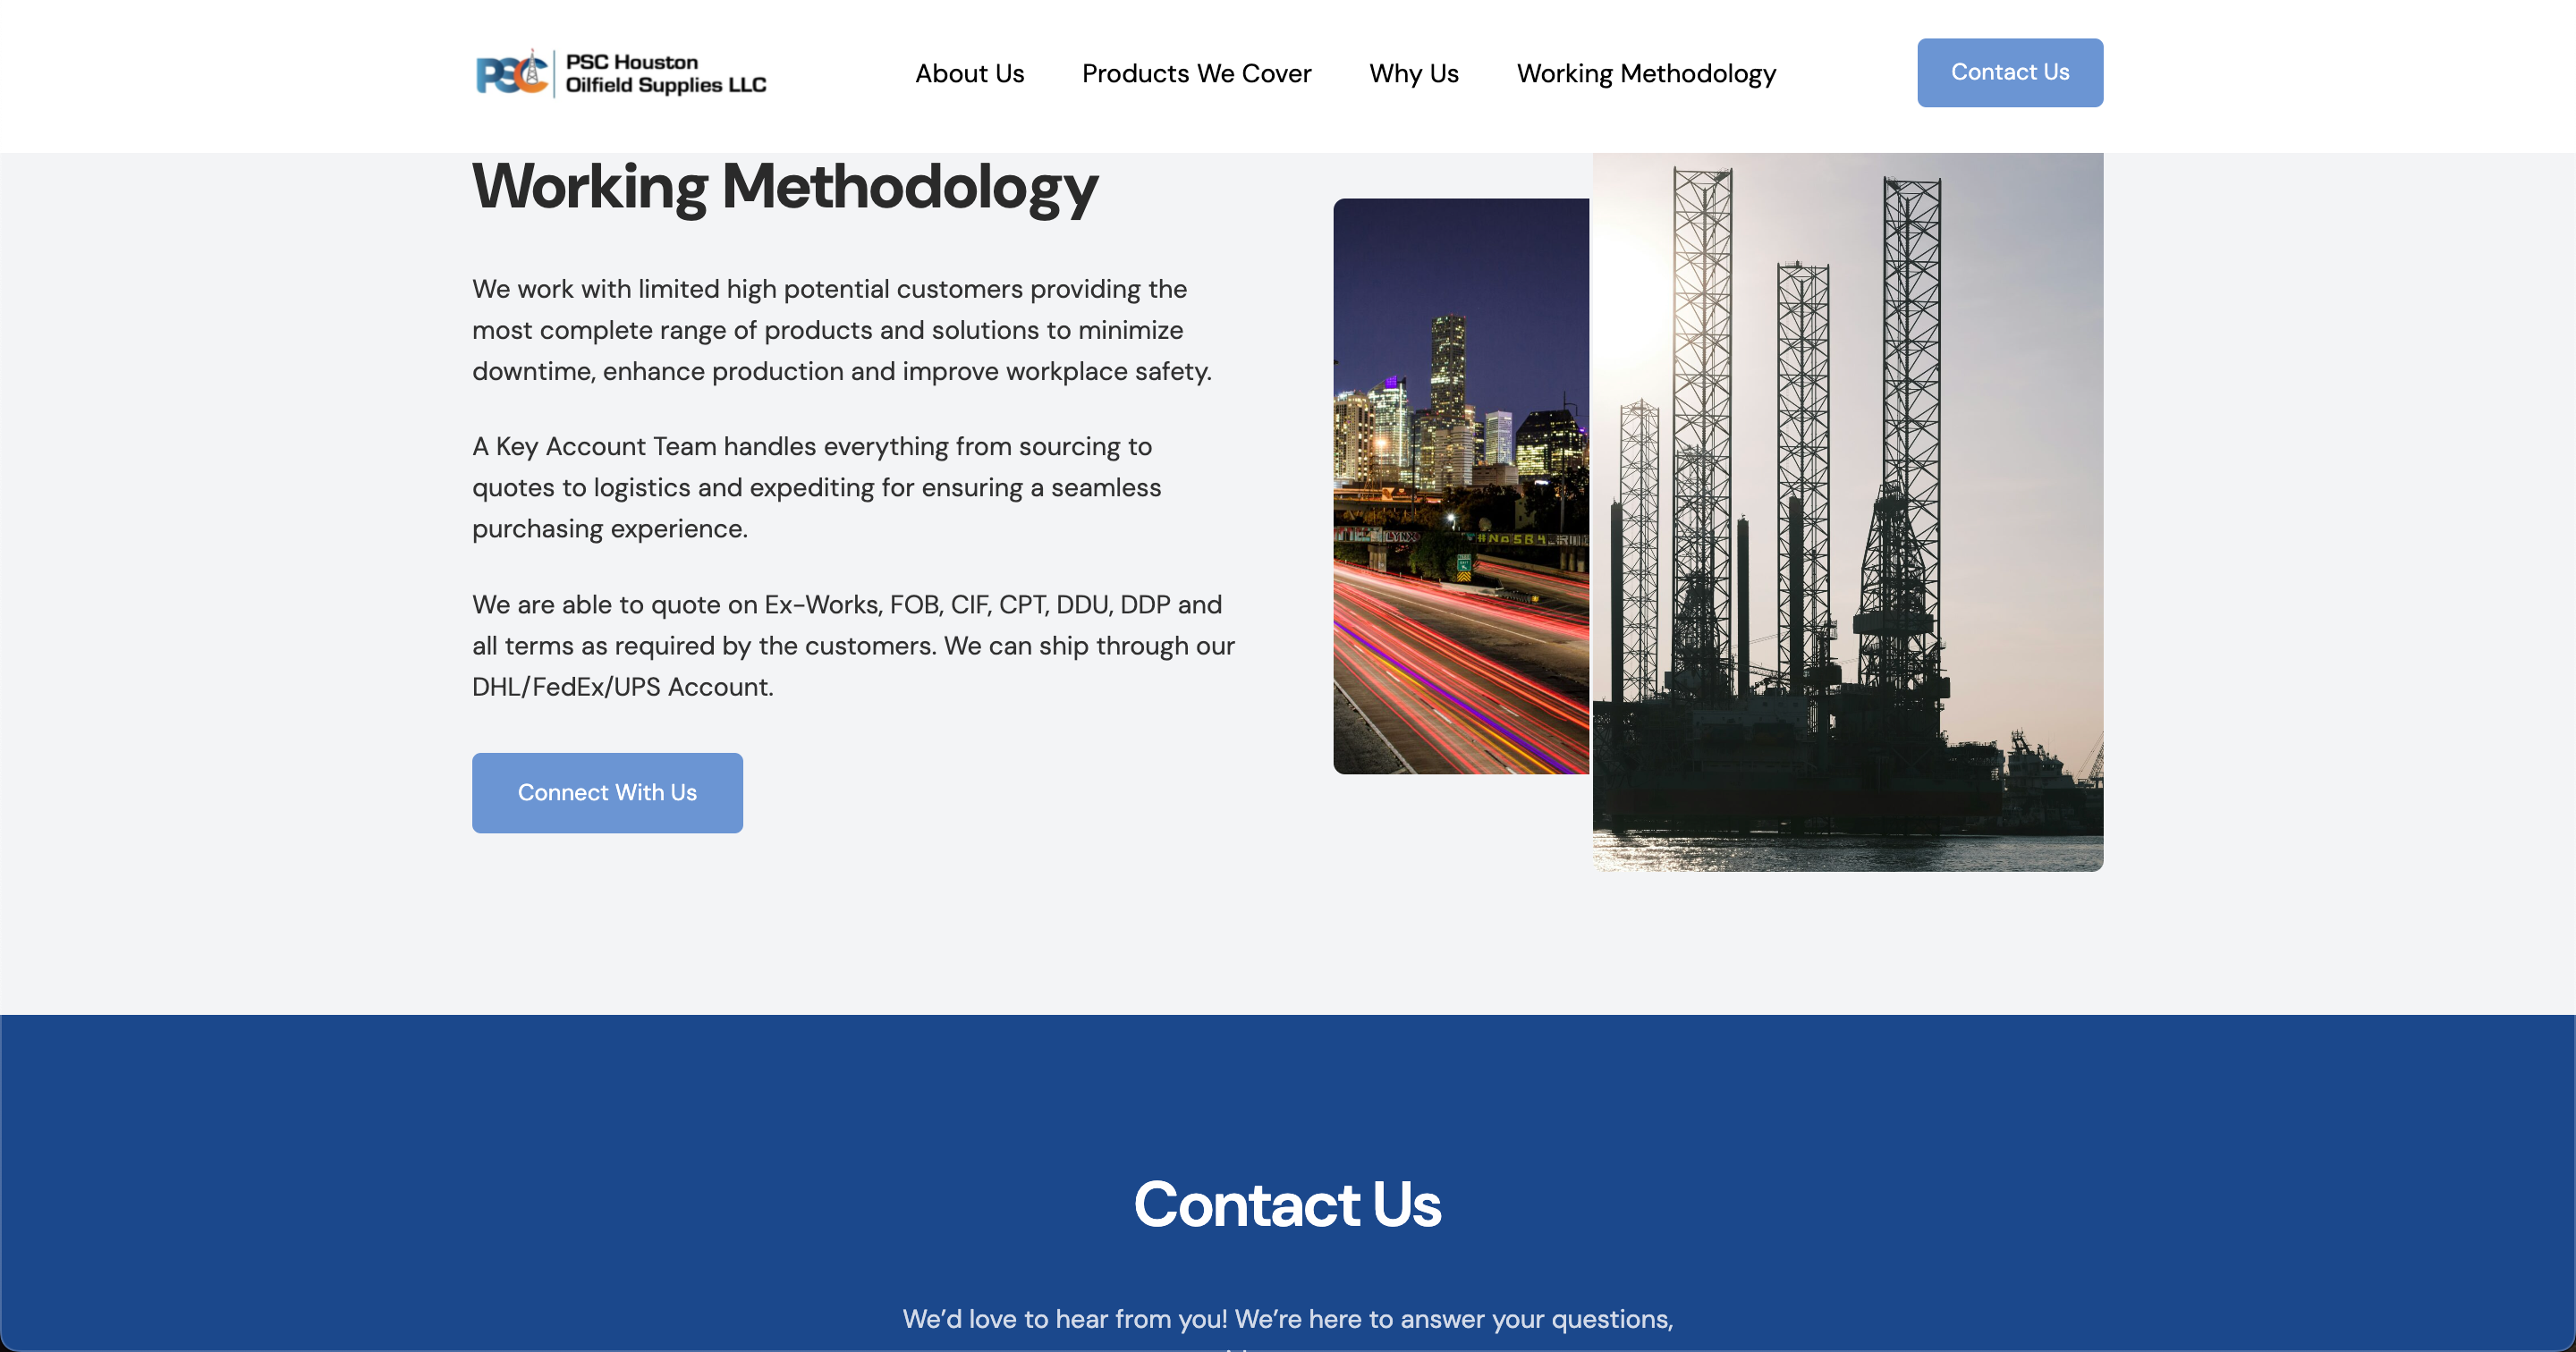 An image of the website, PSC Houston Oilfield Supplies.